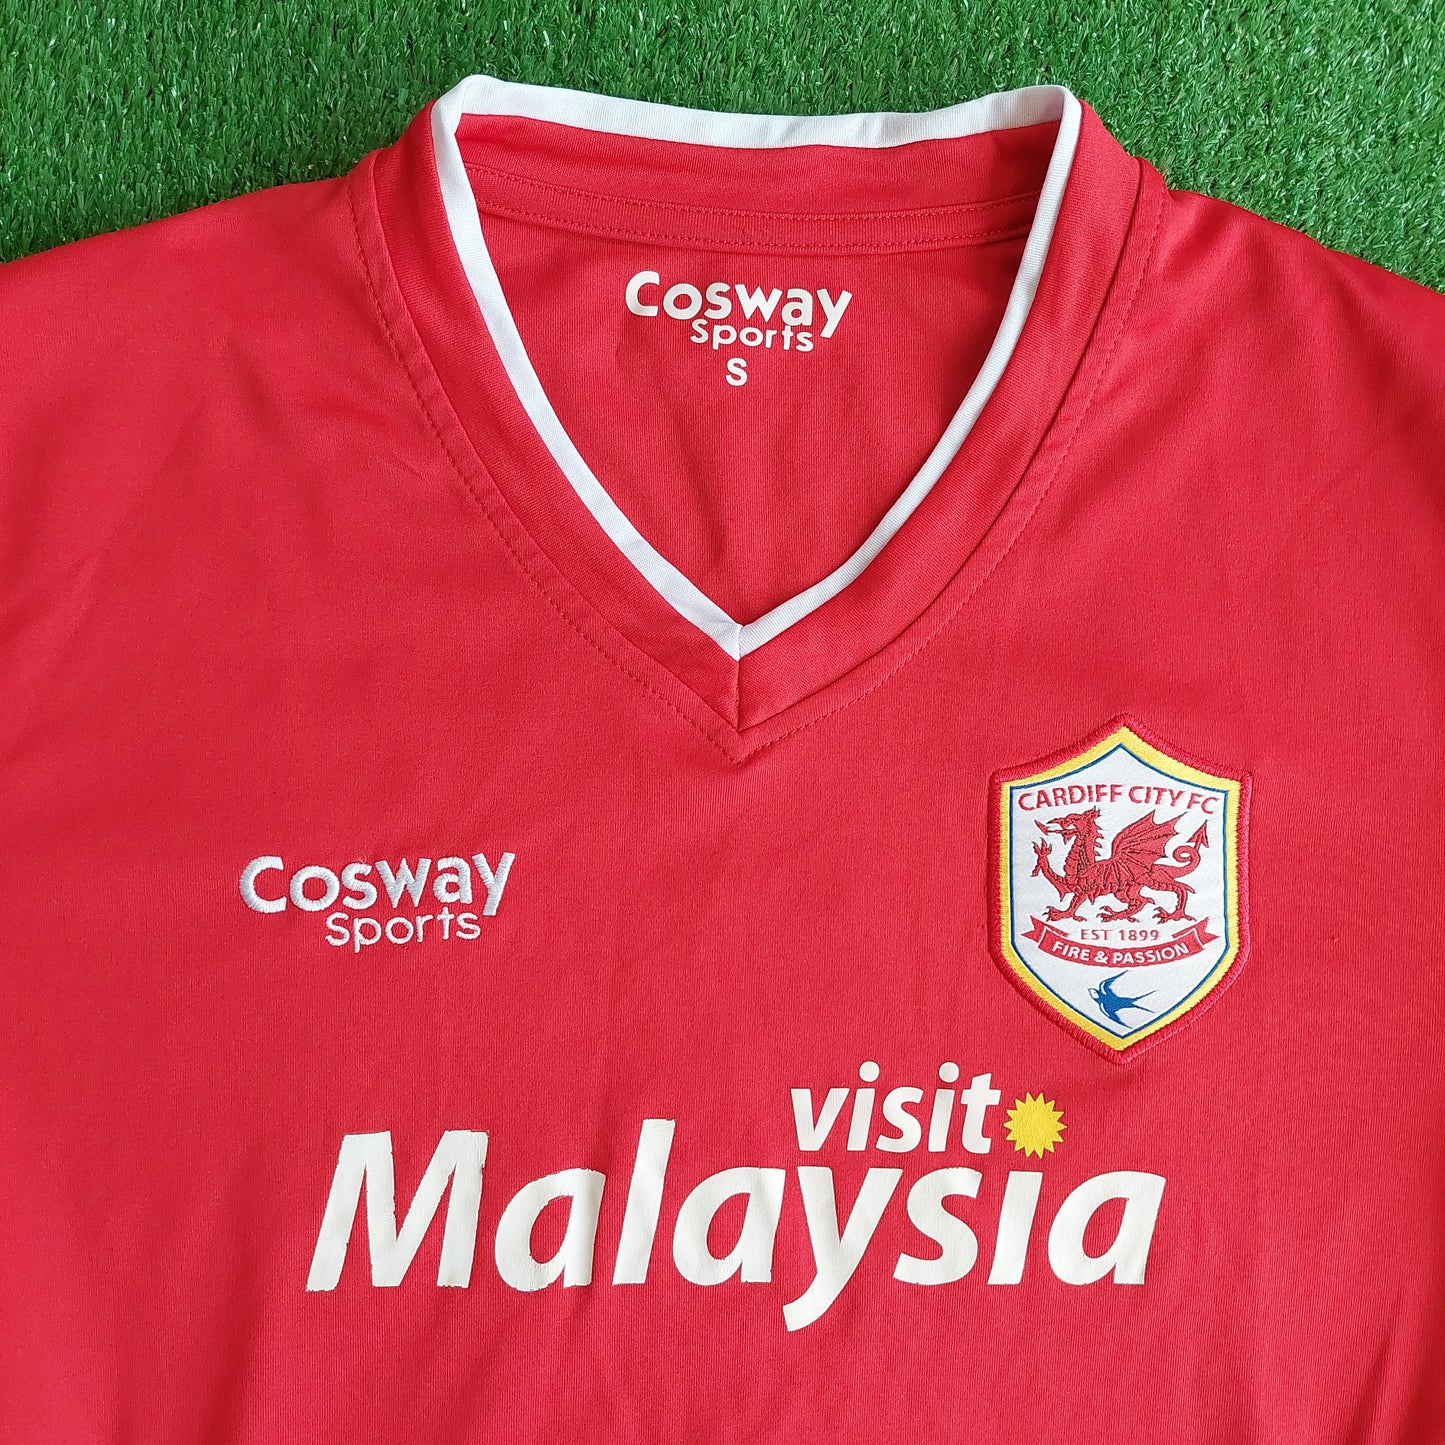 Cardiff City 2014/15 Home Shirt (Excellent) - Size S